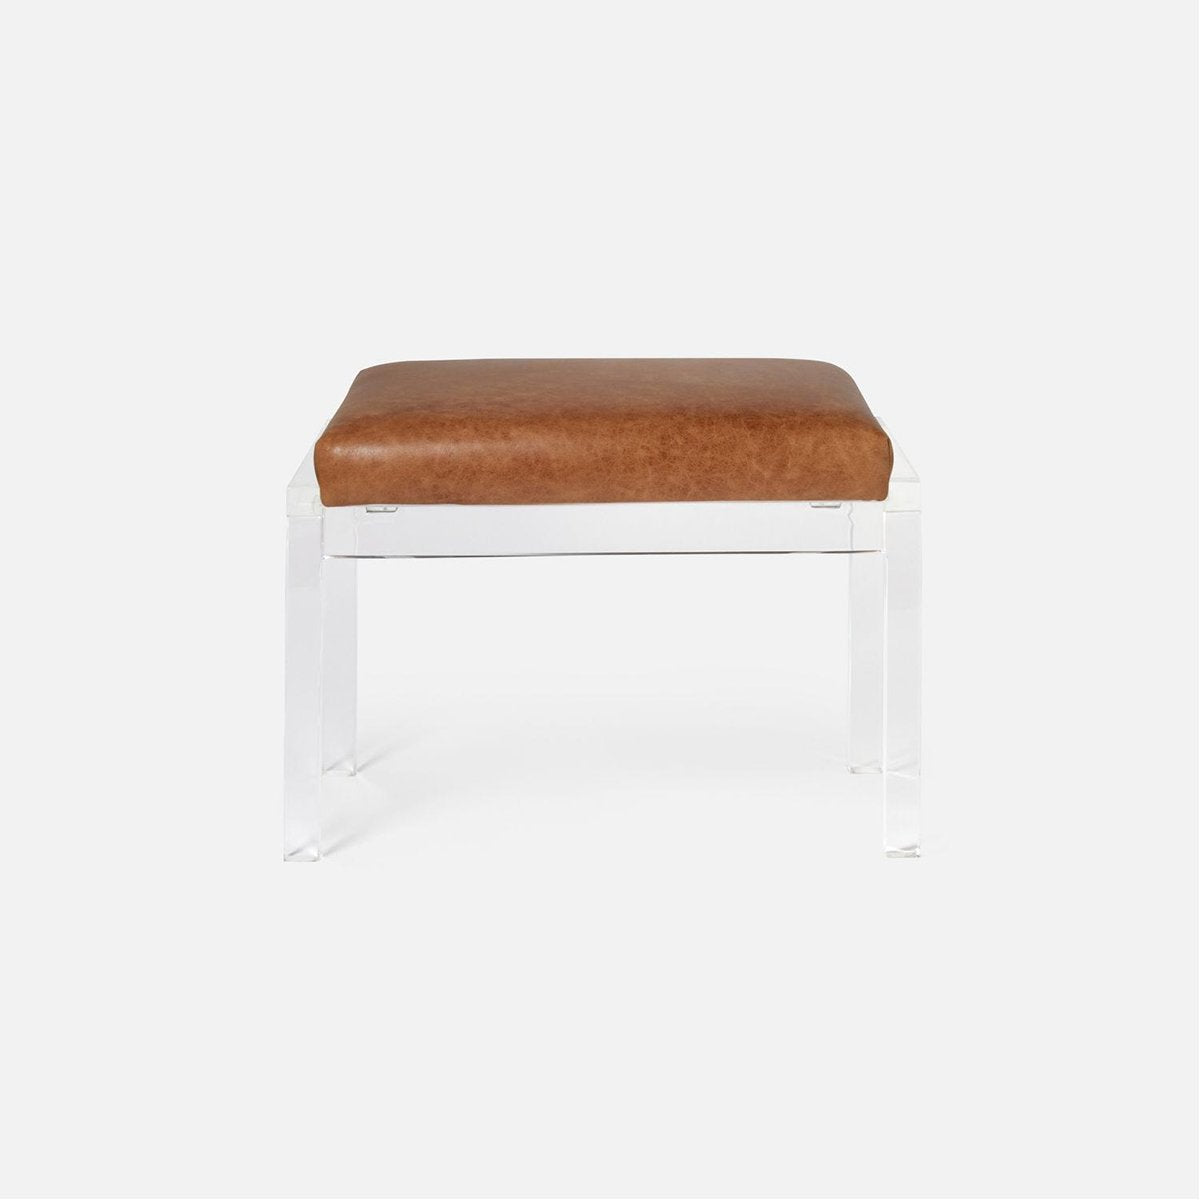 Made Goods Artem Single Upholstered Bench in Bassac Leather